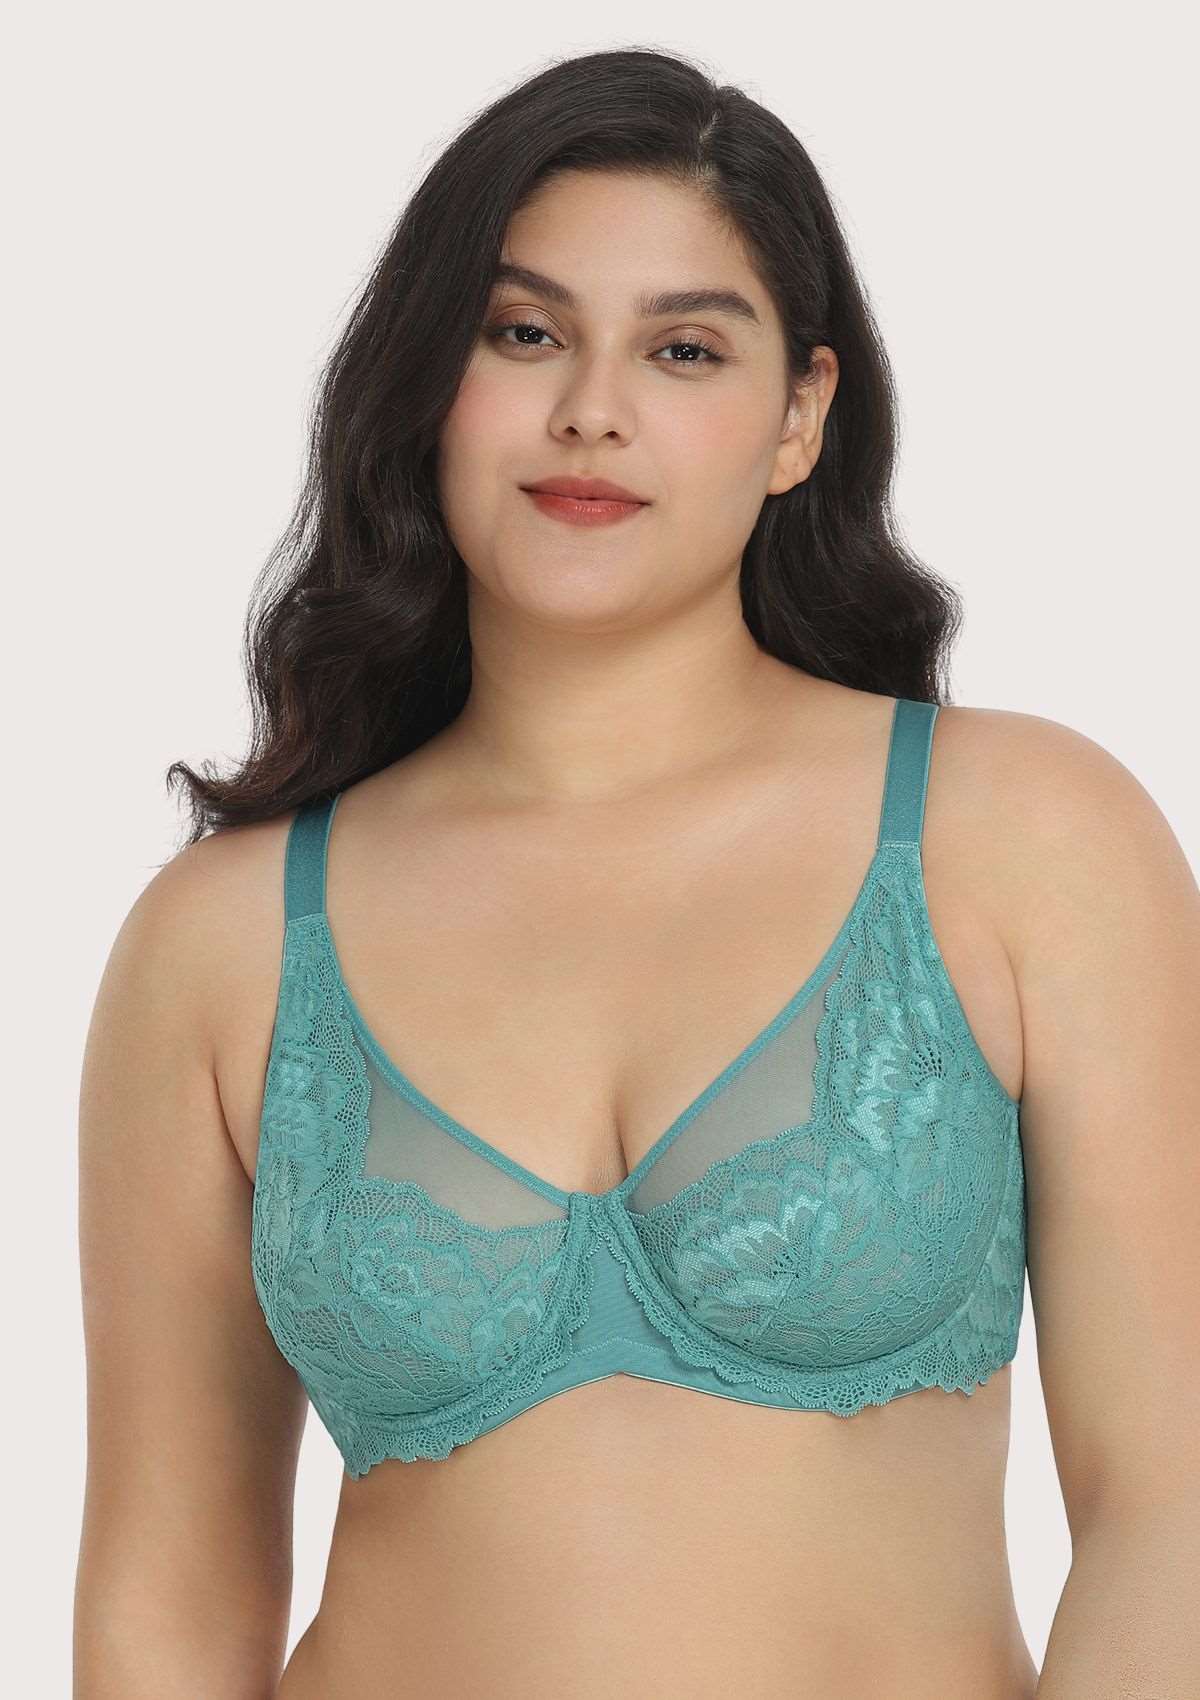 HSIA Paeonia Lace Full Coverage Underwire Non-Padded Uplifting Bra - Light Coral / 38 / D